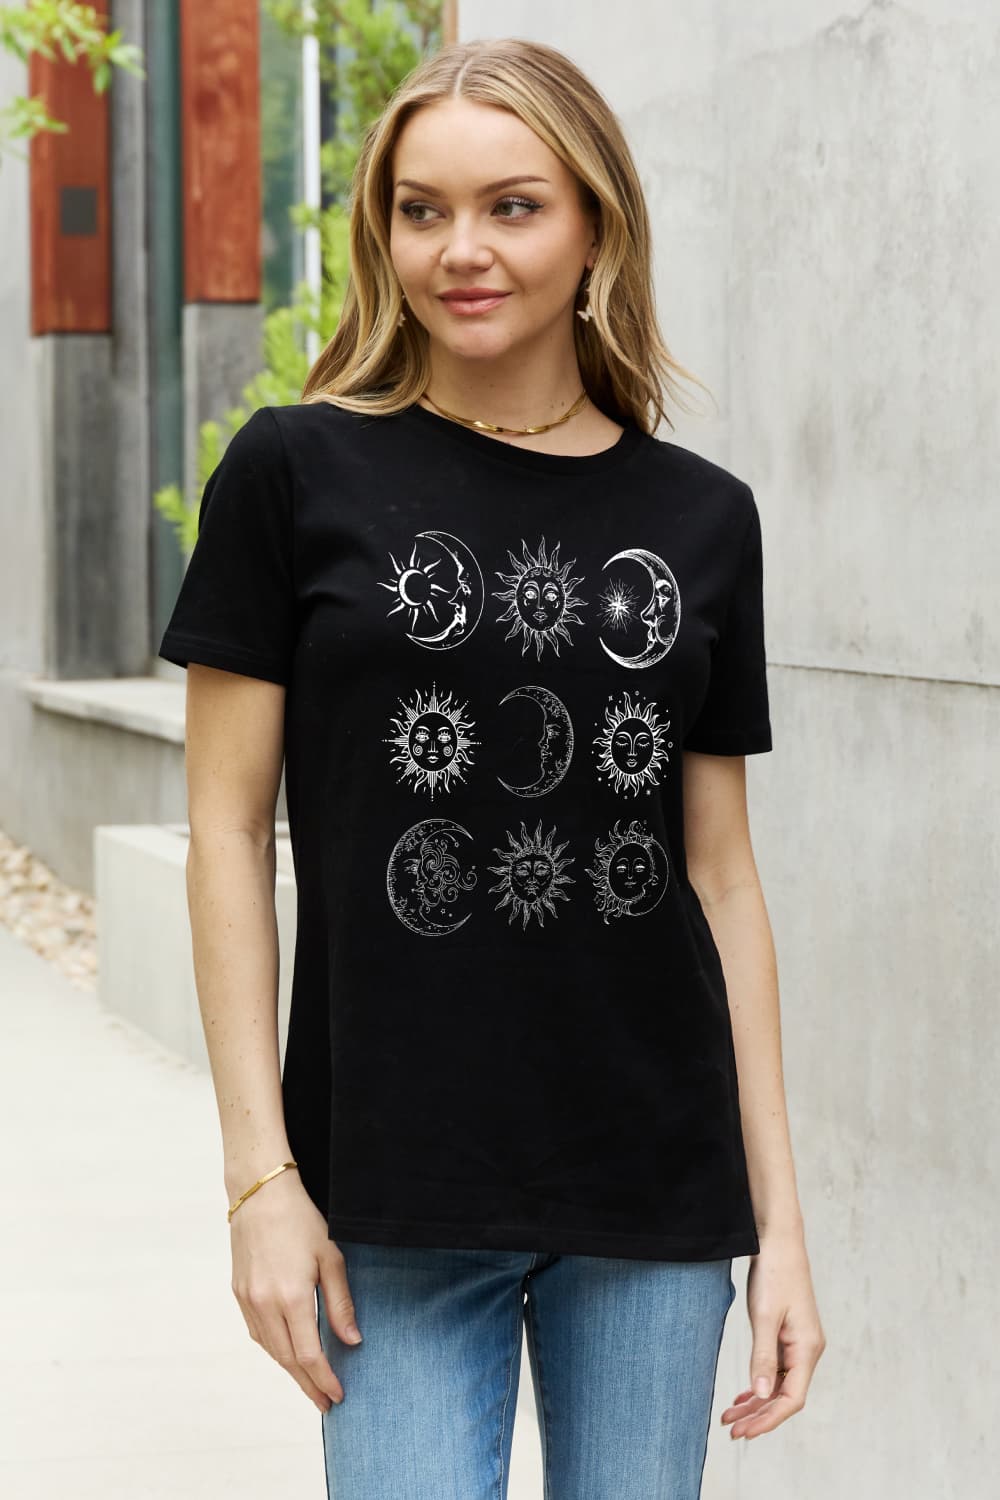 Black Simply Love Sun and Moon Graphic Cotton Tee